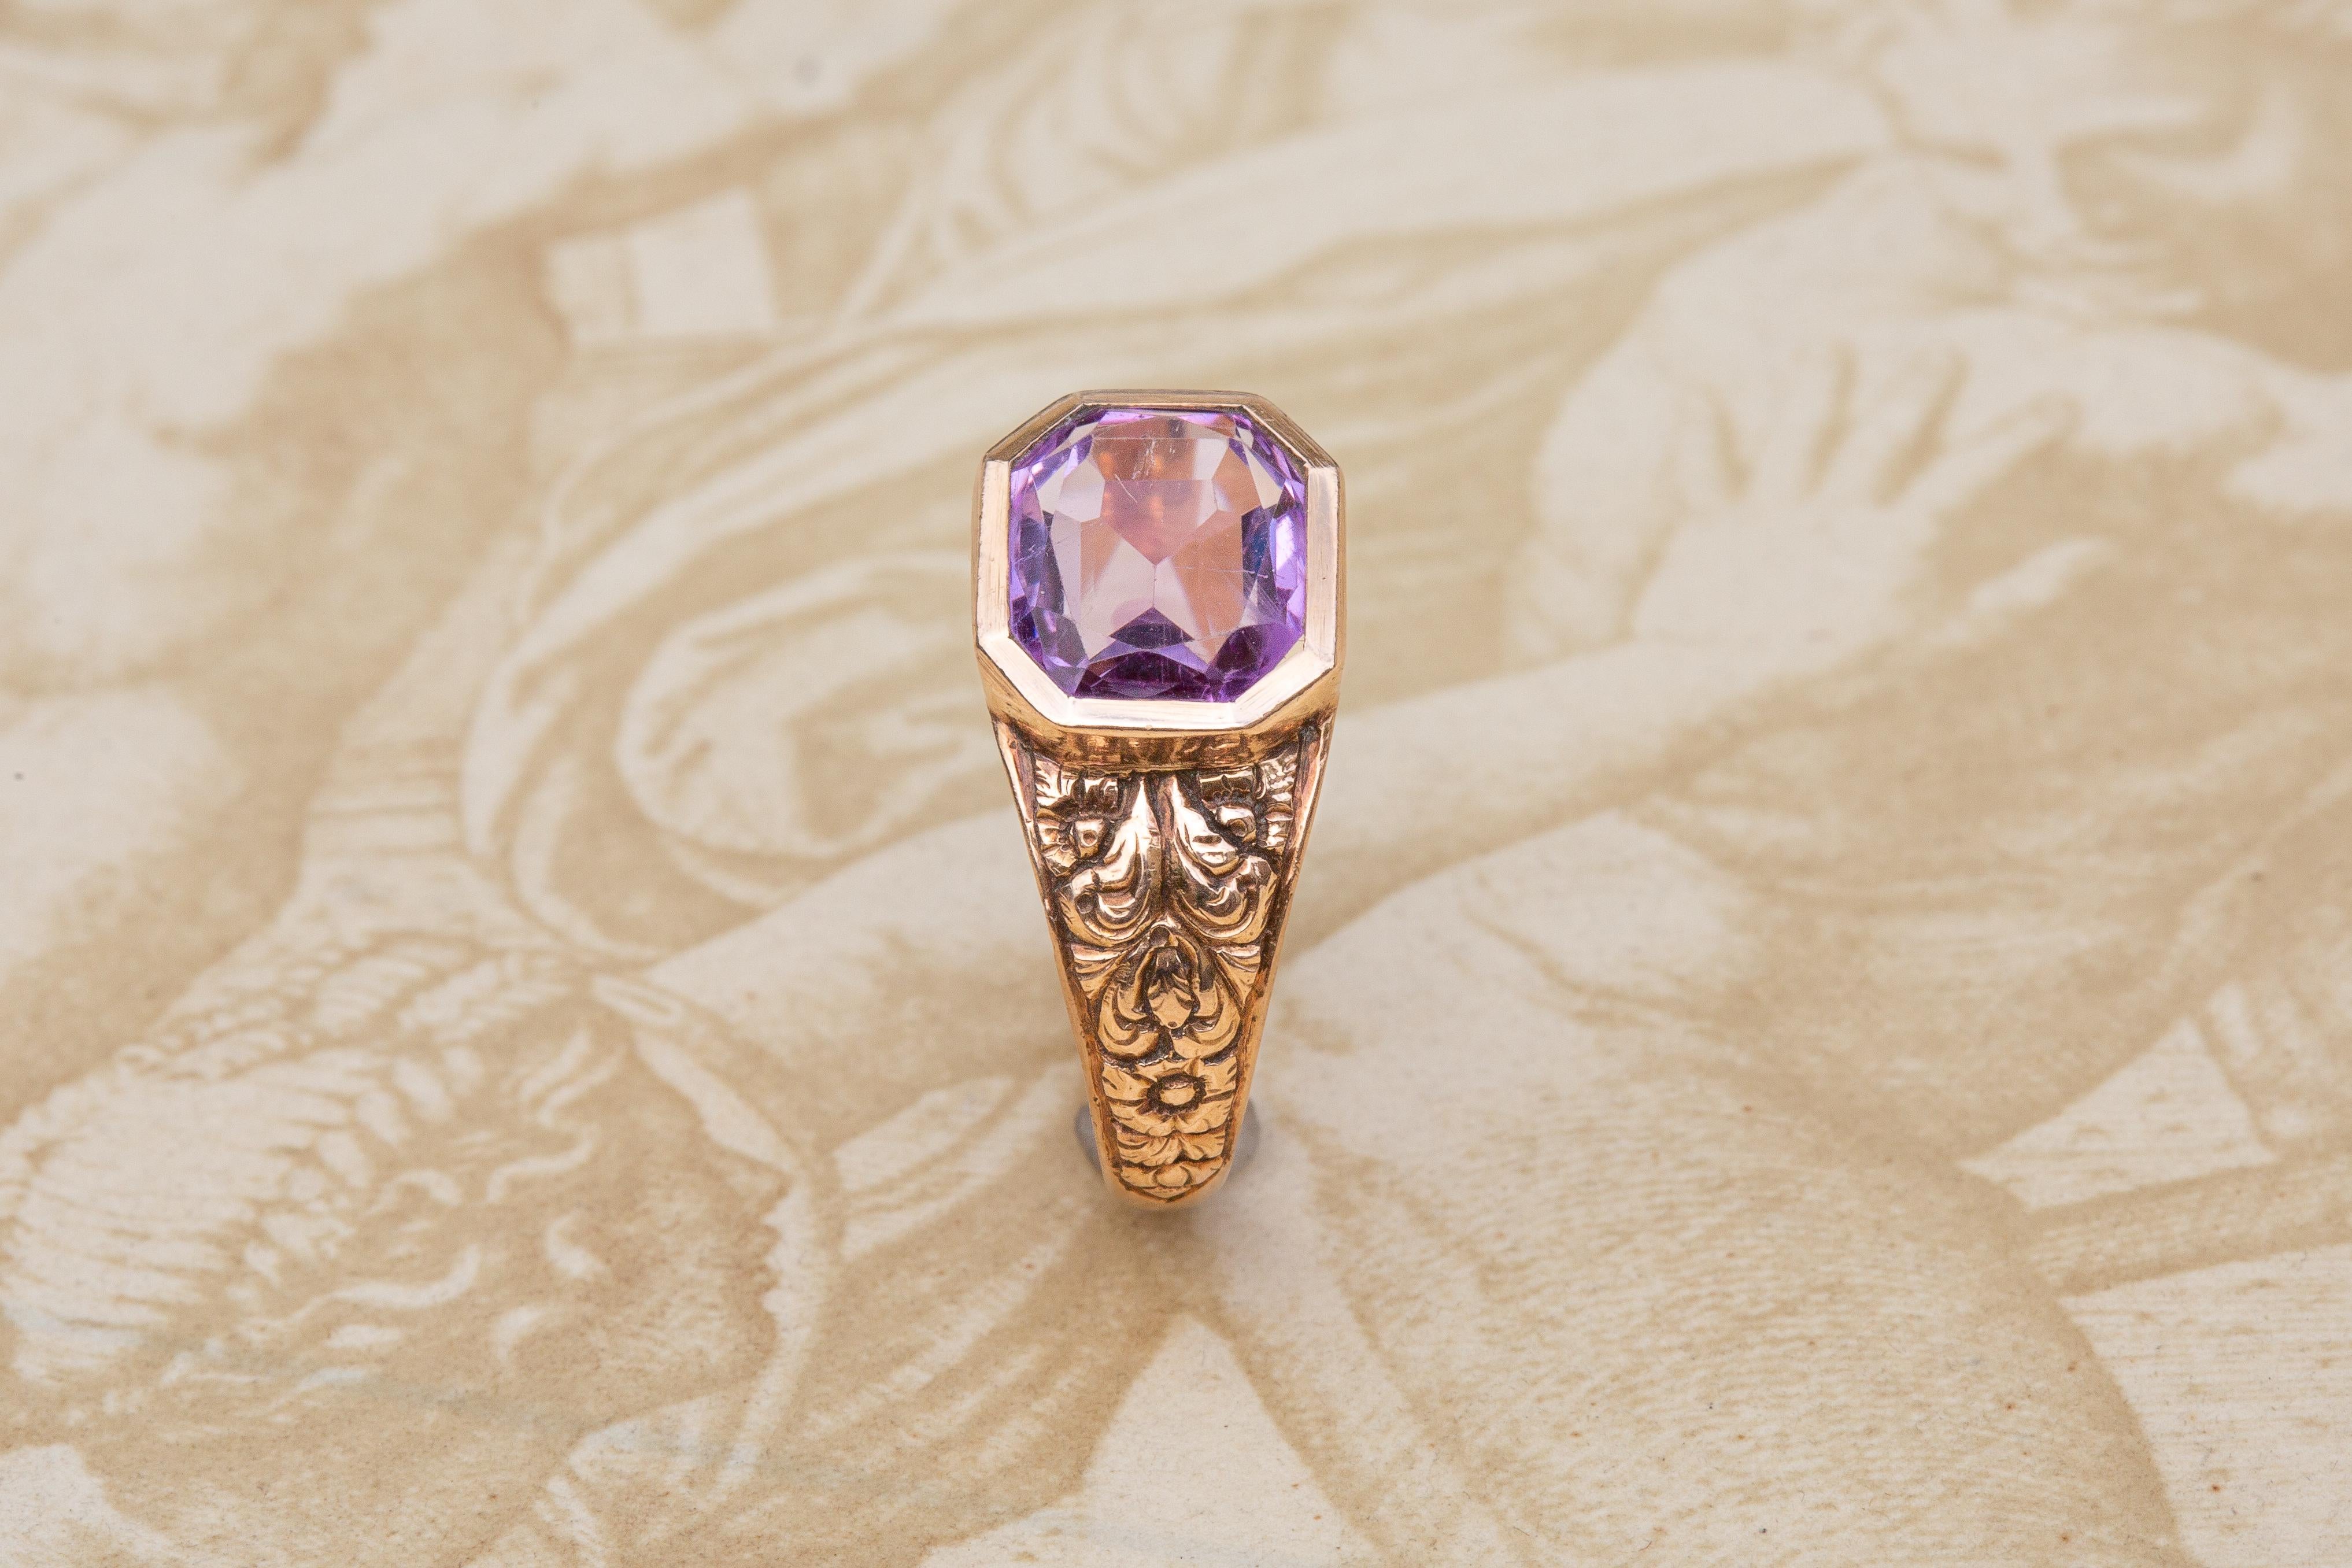 Stunning Antique Victorian 19th Century 14k Gold and Amethyst Ring 3